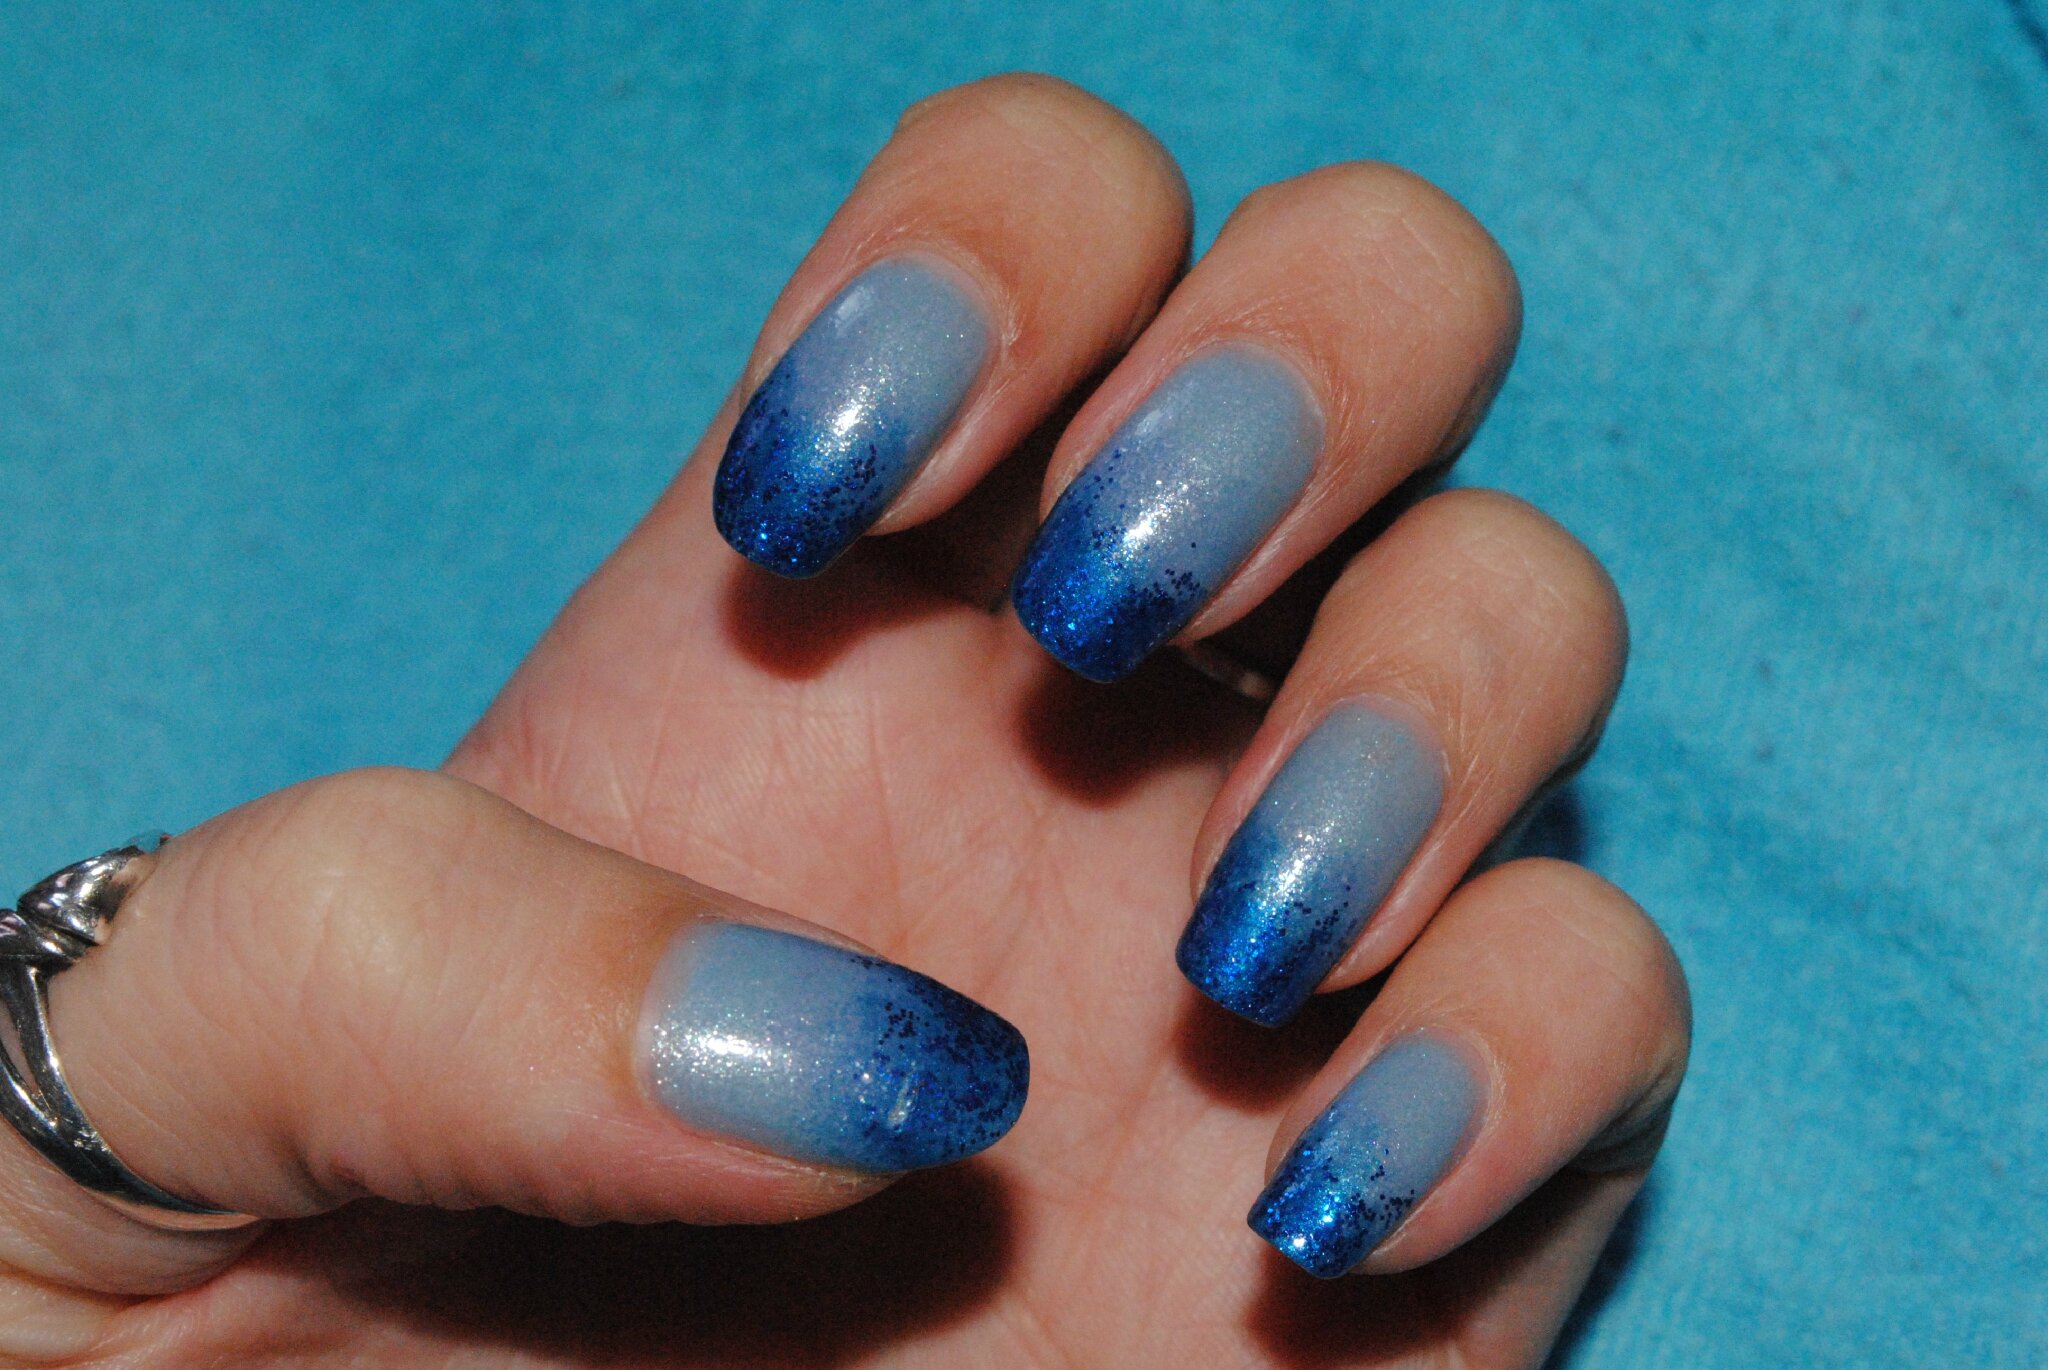 50+ Blue Nail Art Ideas to Try - wide 3